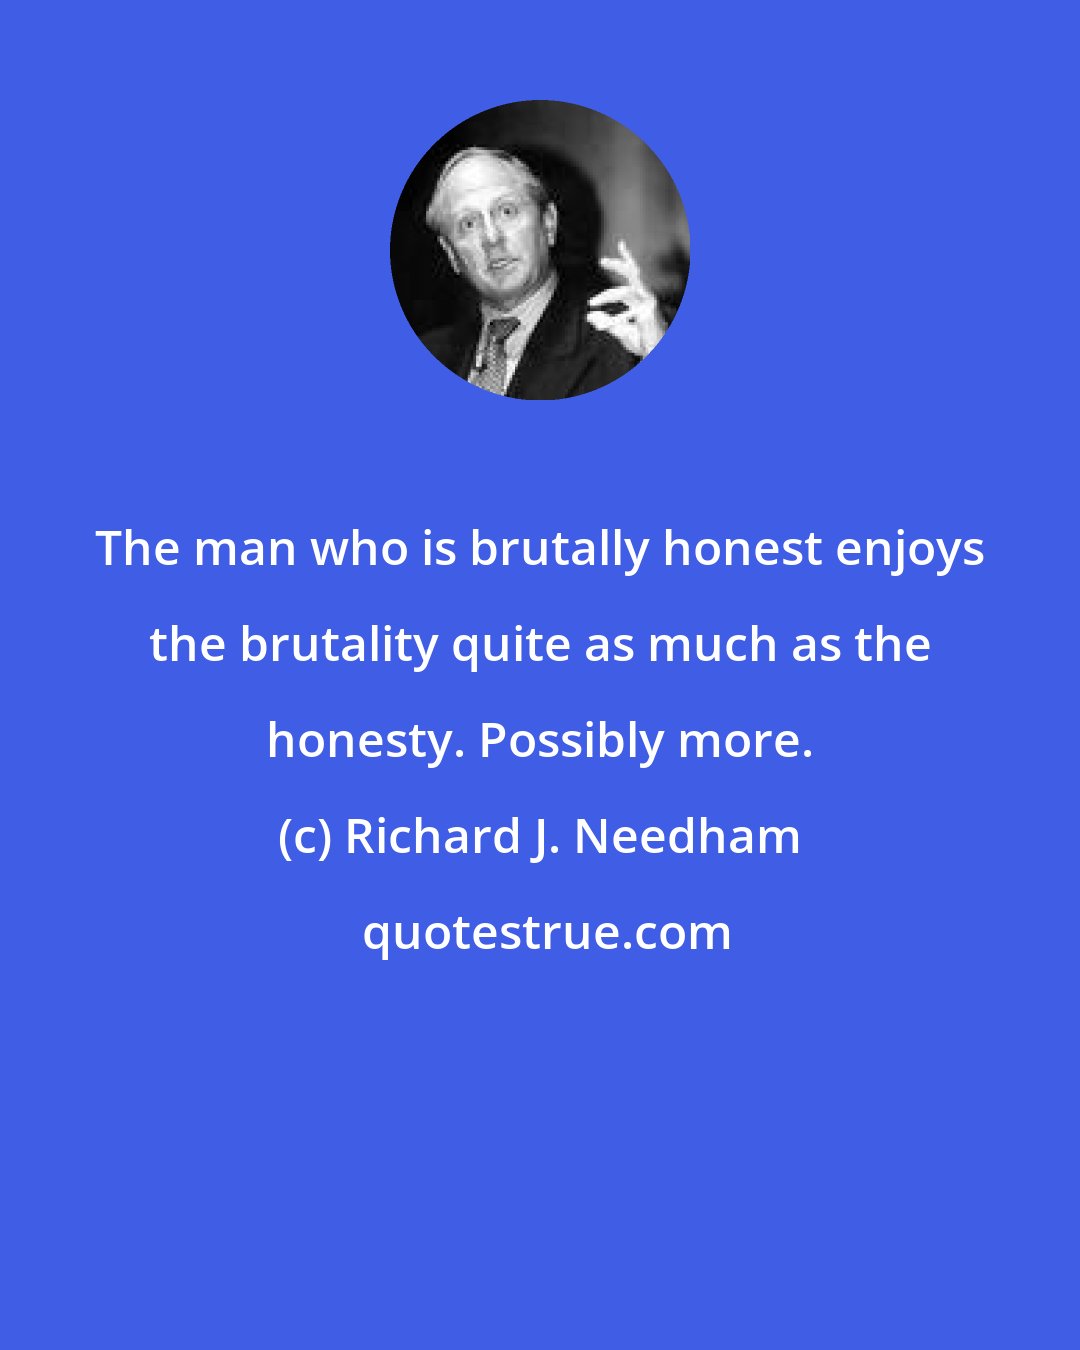 Richard J. Needham: The man who is brutally honest enjoys the brutality quite as much as the honesty. Possibly more.